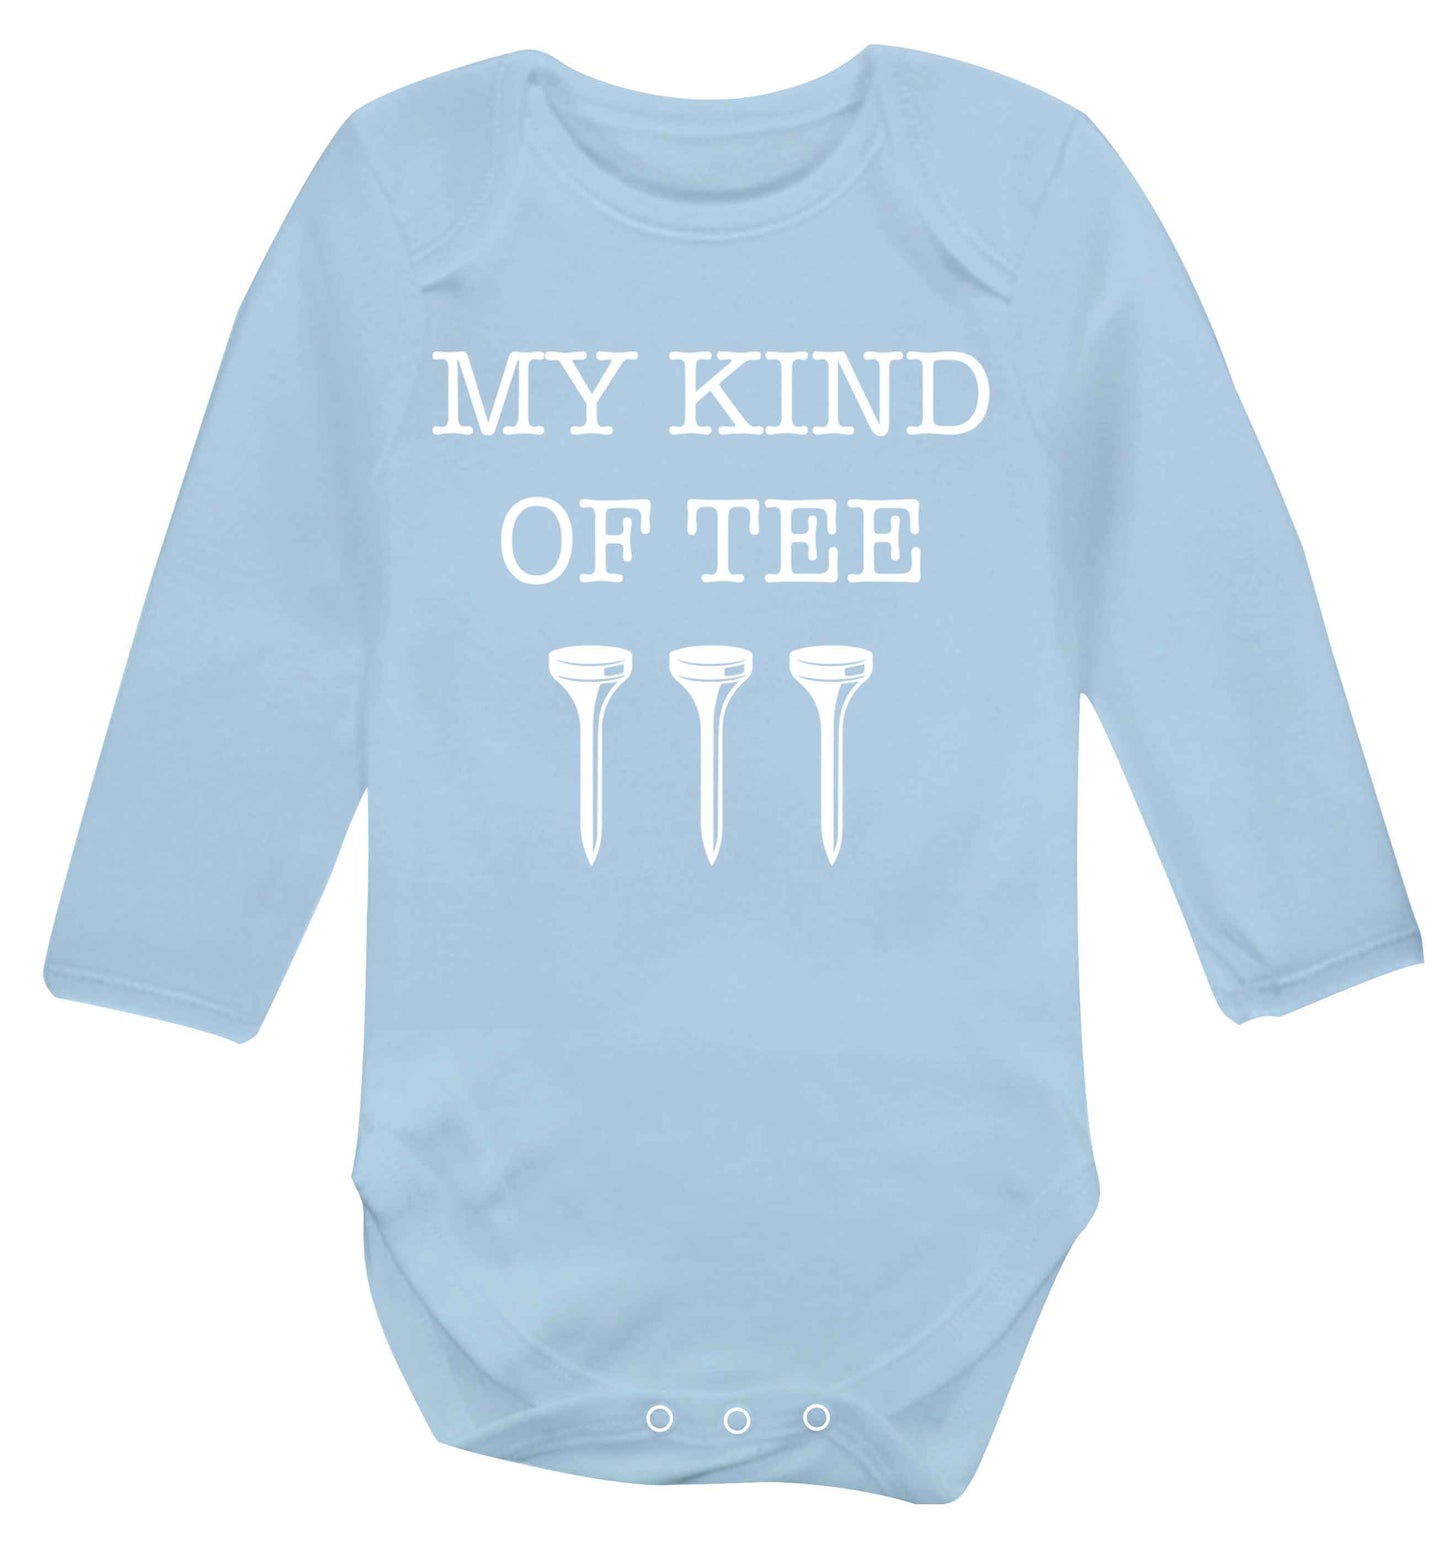 My kind of tee Baby Vest long sleeved pale blue 6-12 months